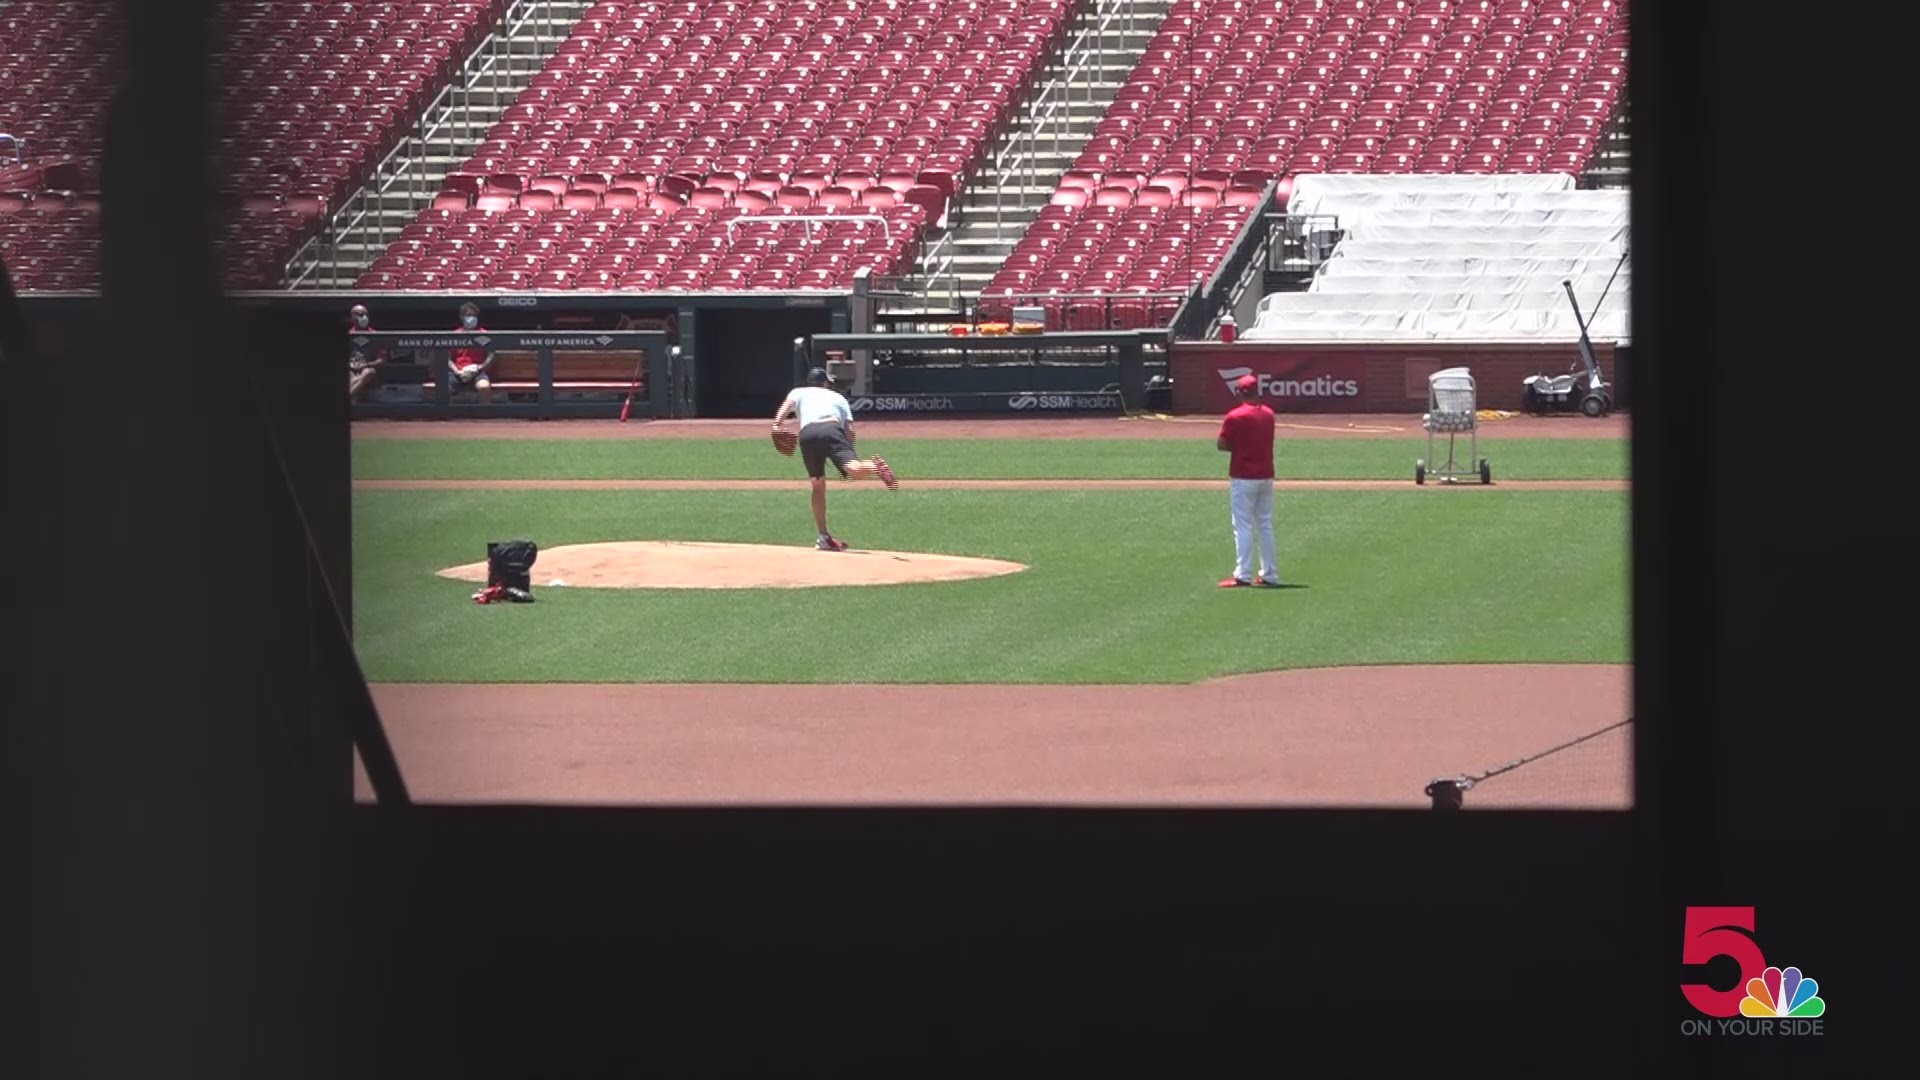 It looks like the Cardinals' veteran is getting ready for a potential season at Busch Stadium.